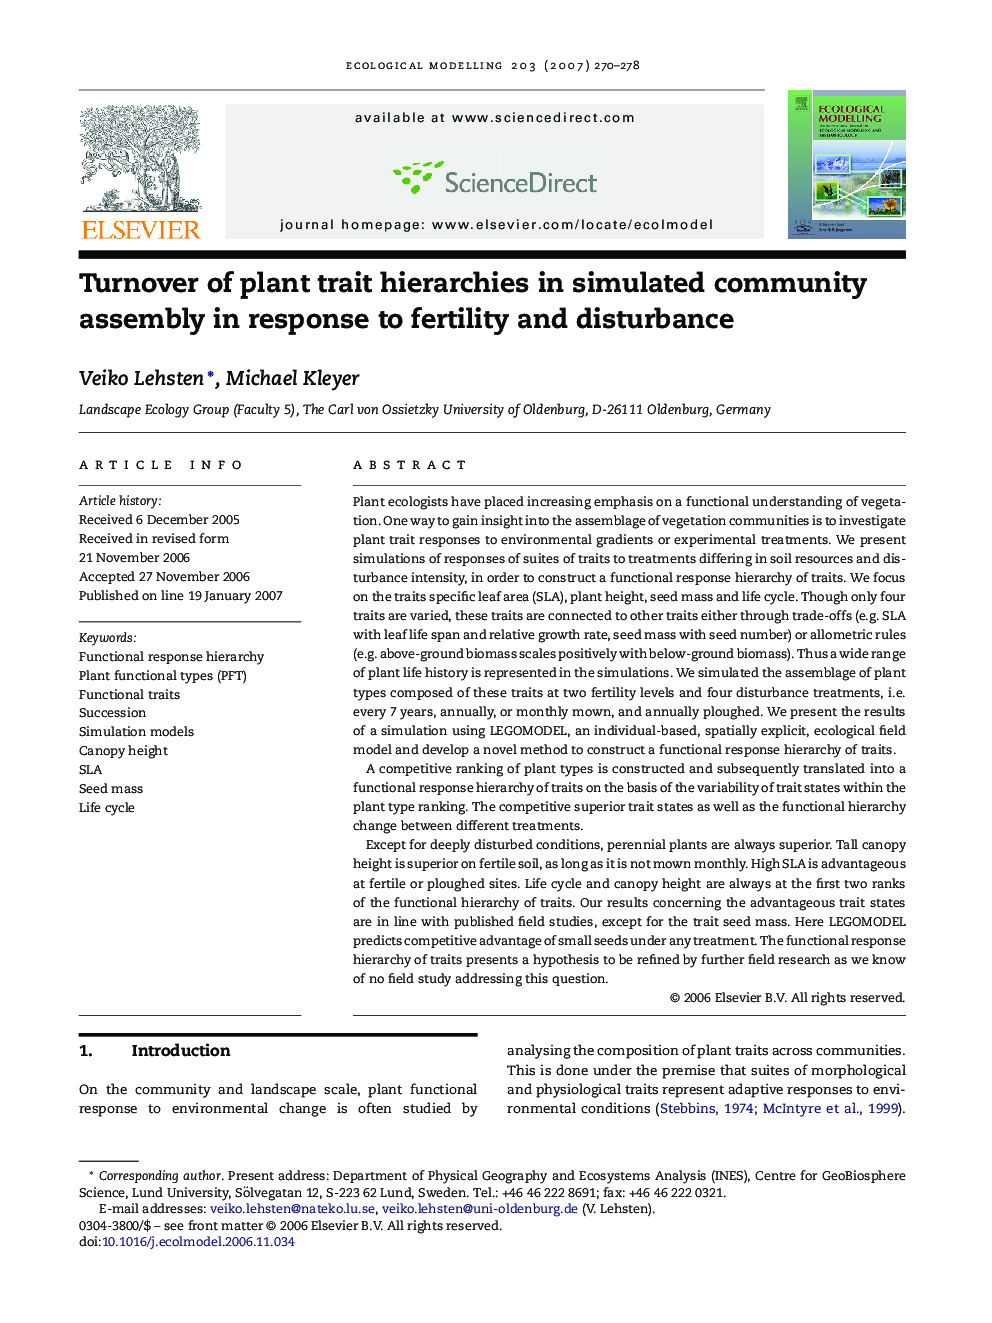 Turnover of plant trait hierarchies in simulated community assembly in response to fertility and disturbance